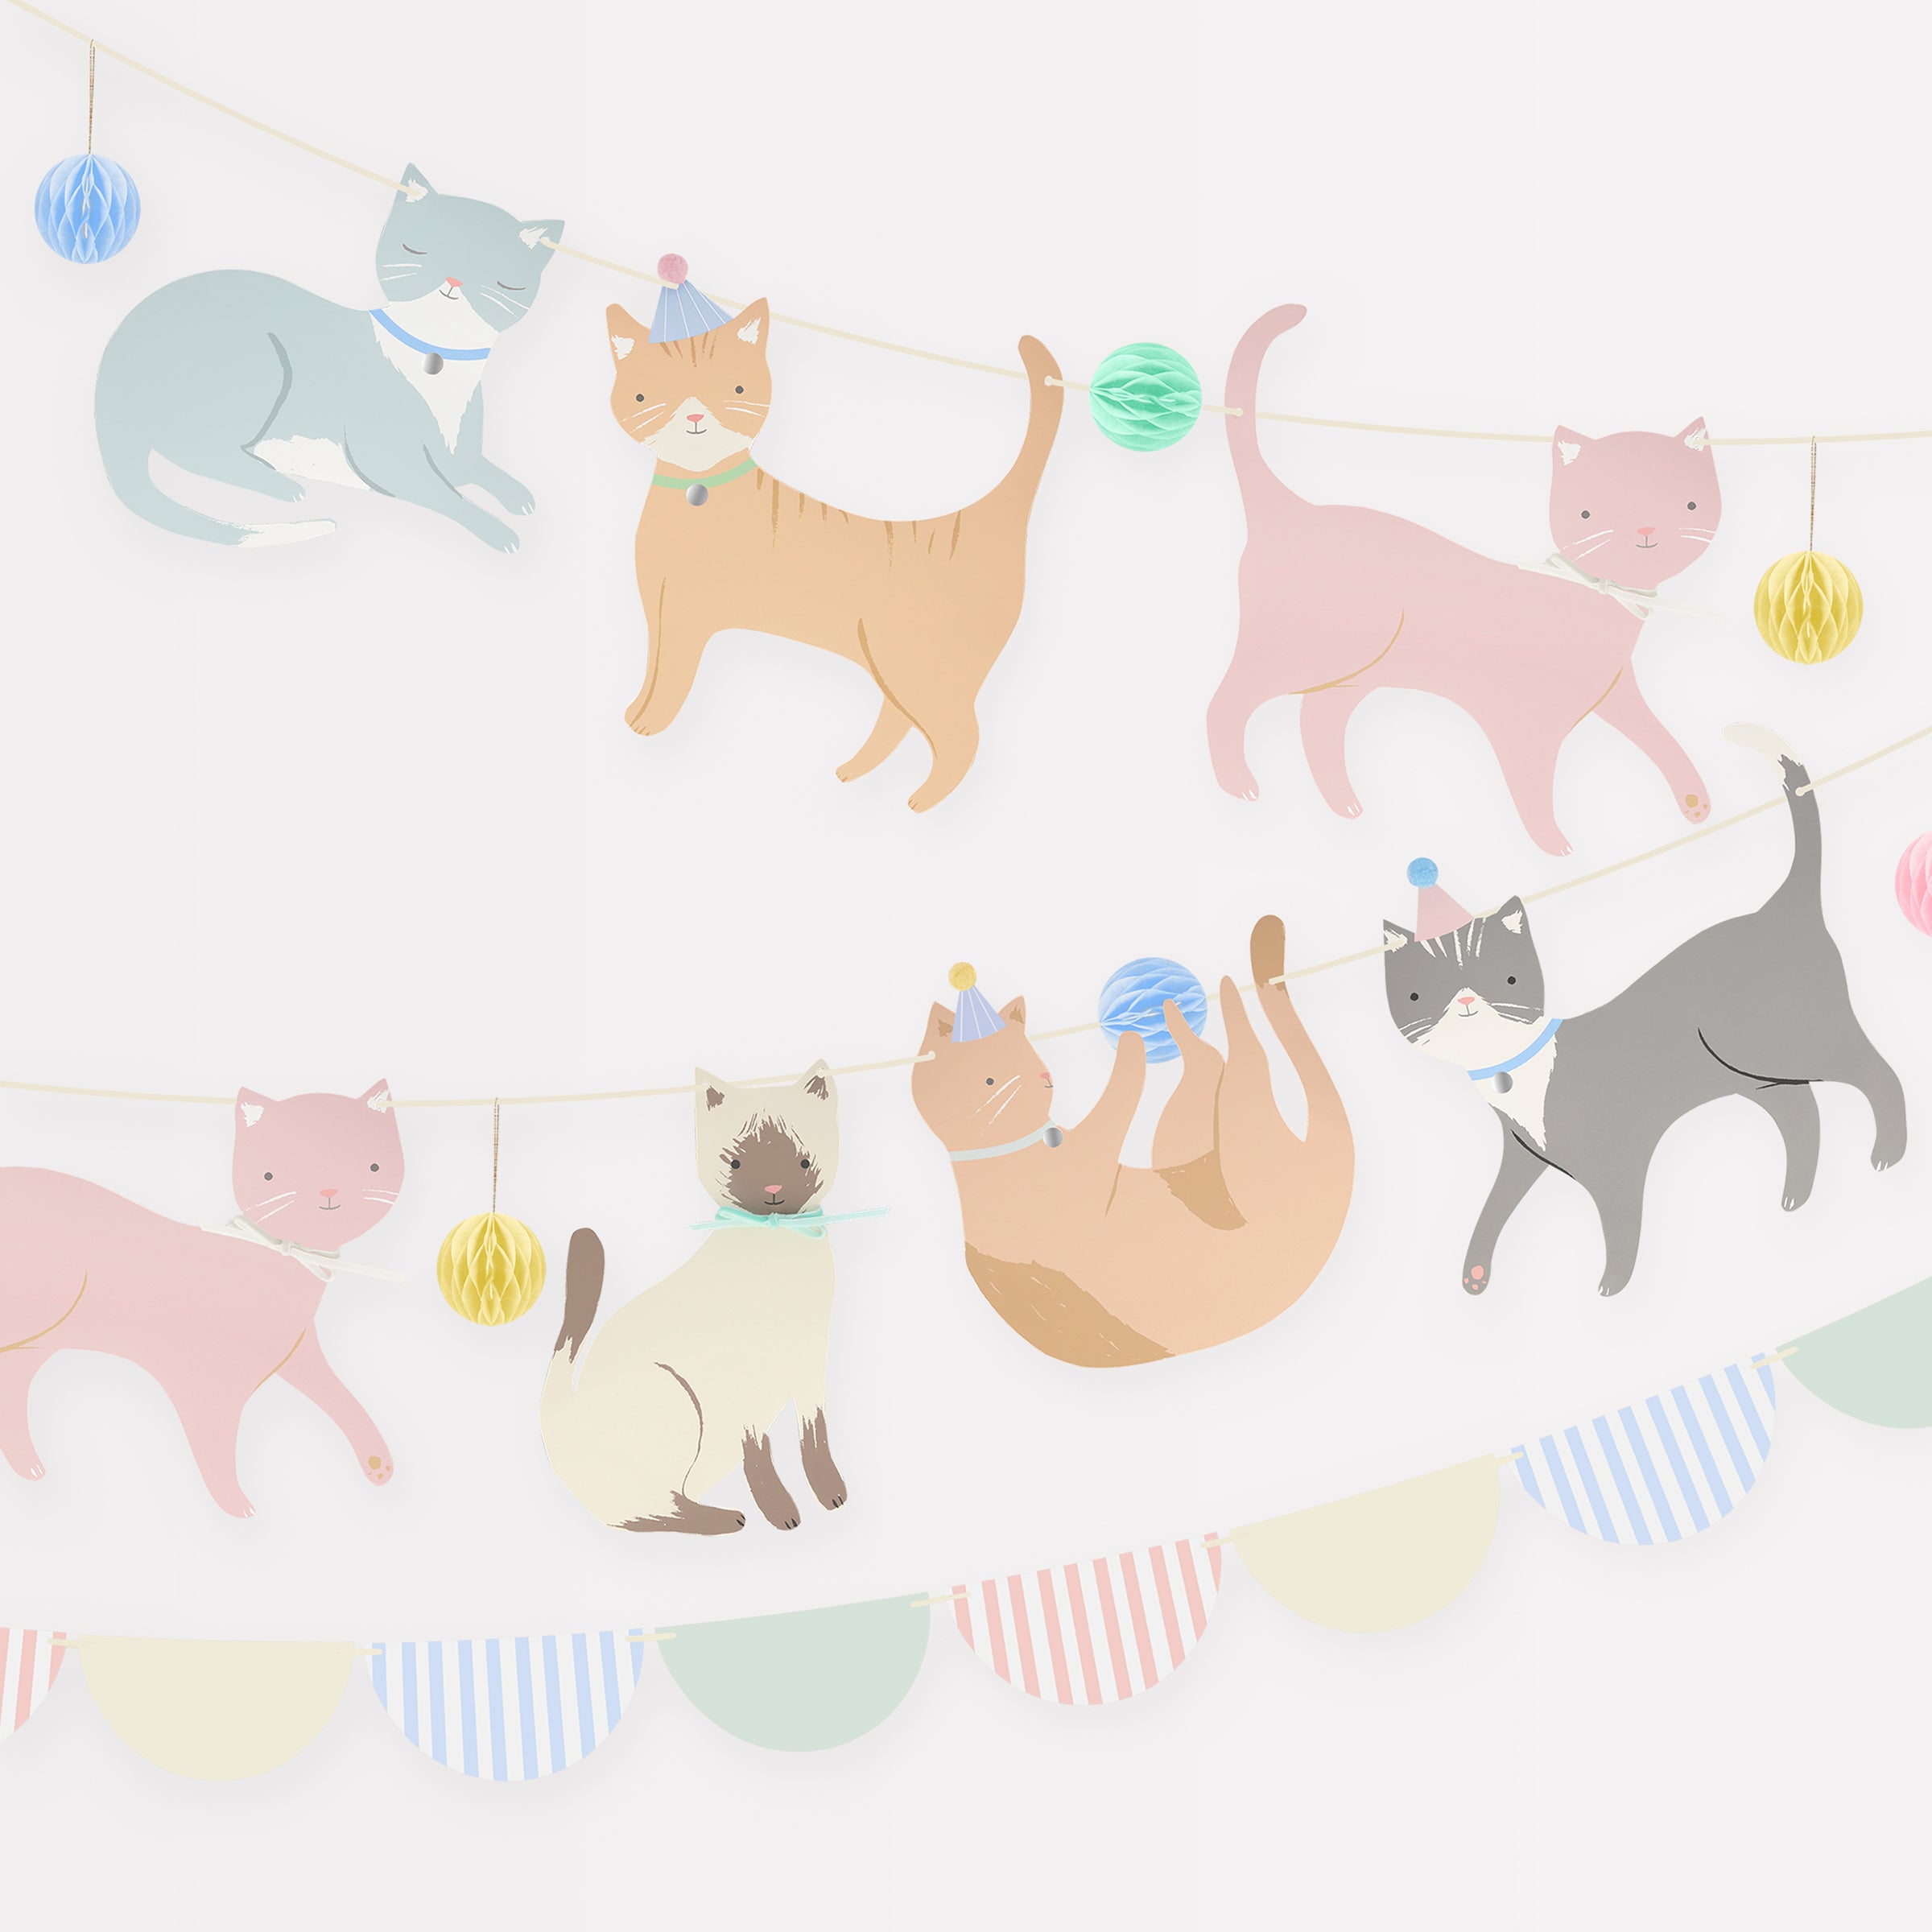 A cat themed birthday party will look amazing with our paper garland featuring cute cat decorations.